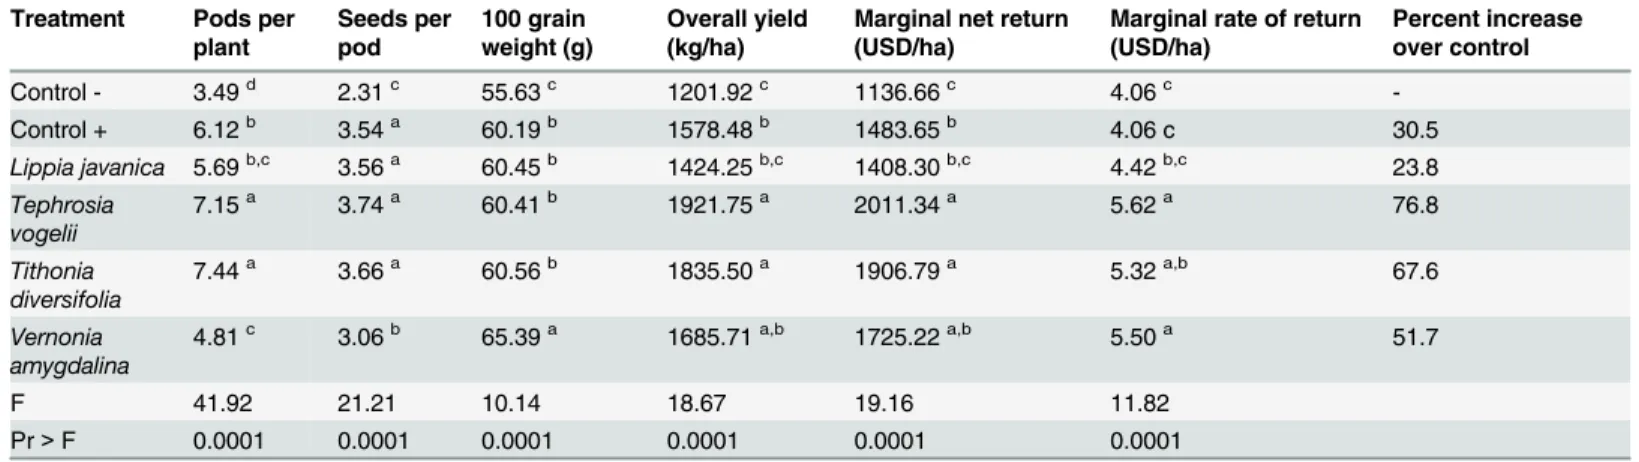 Table 4. Analysis of variance (ANOVA) on the yield and economic return of common bean plants sprayed weekly with extracts of four plant spe- spe-cies and positive/negative control treatments